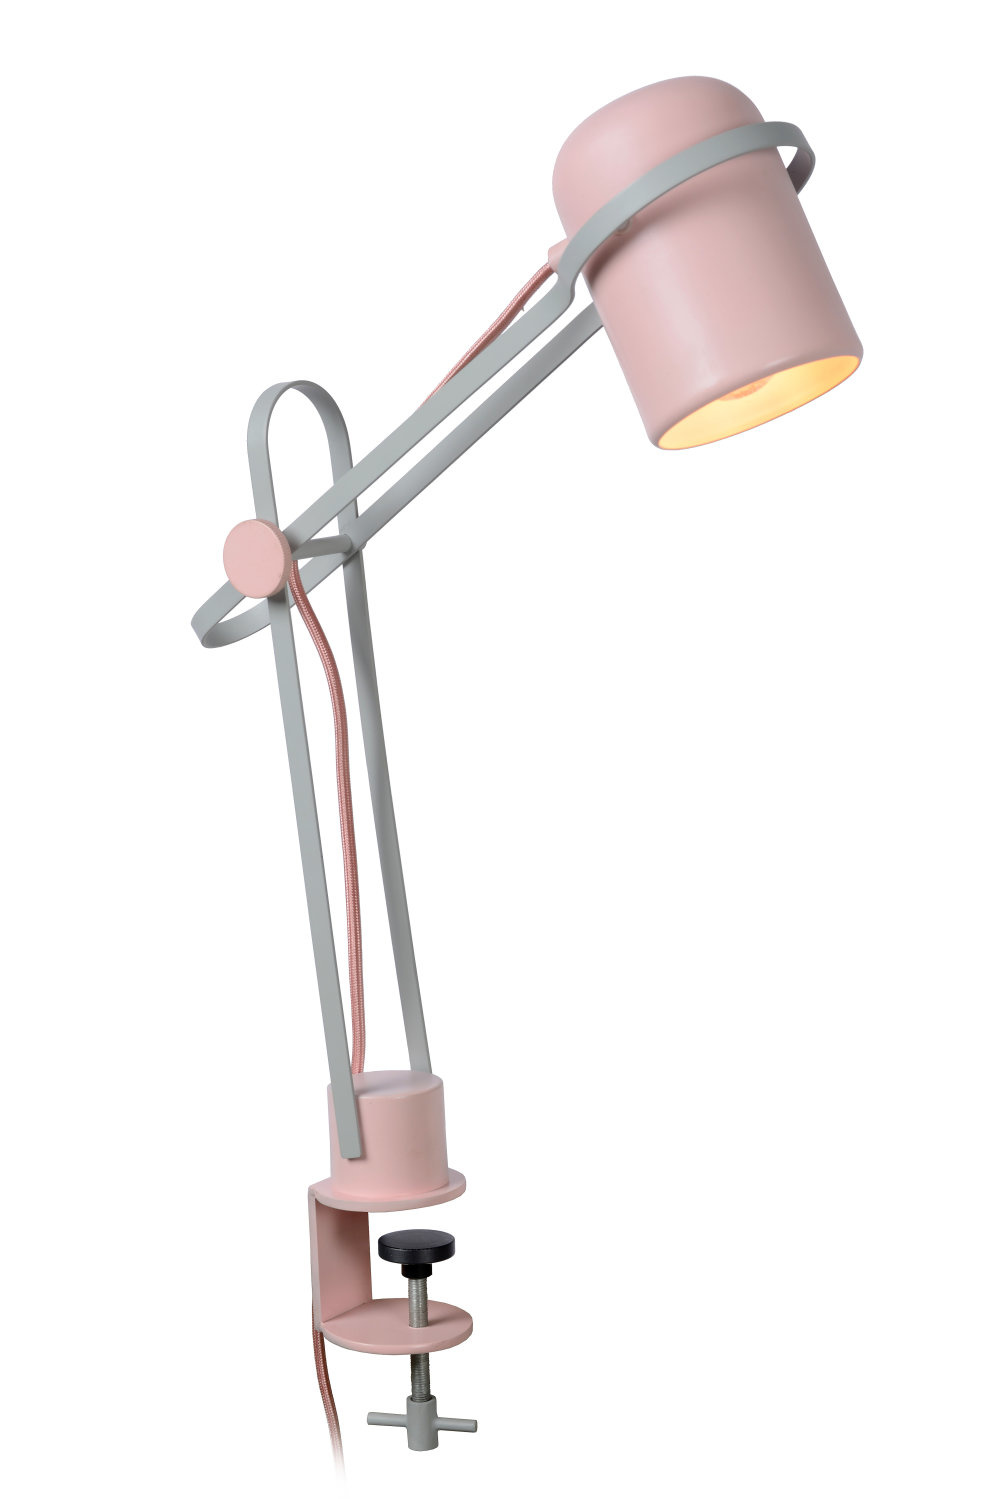 Lucide BASTIN Klemlamp Kinder-Roze-1xE14-25W-Staal